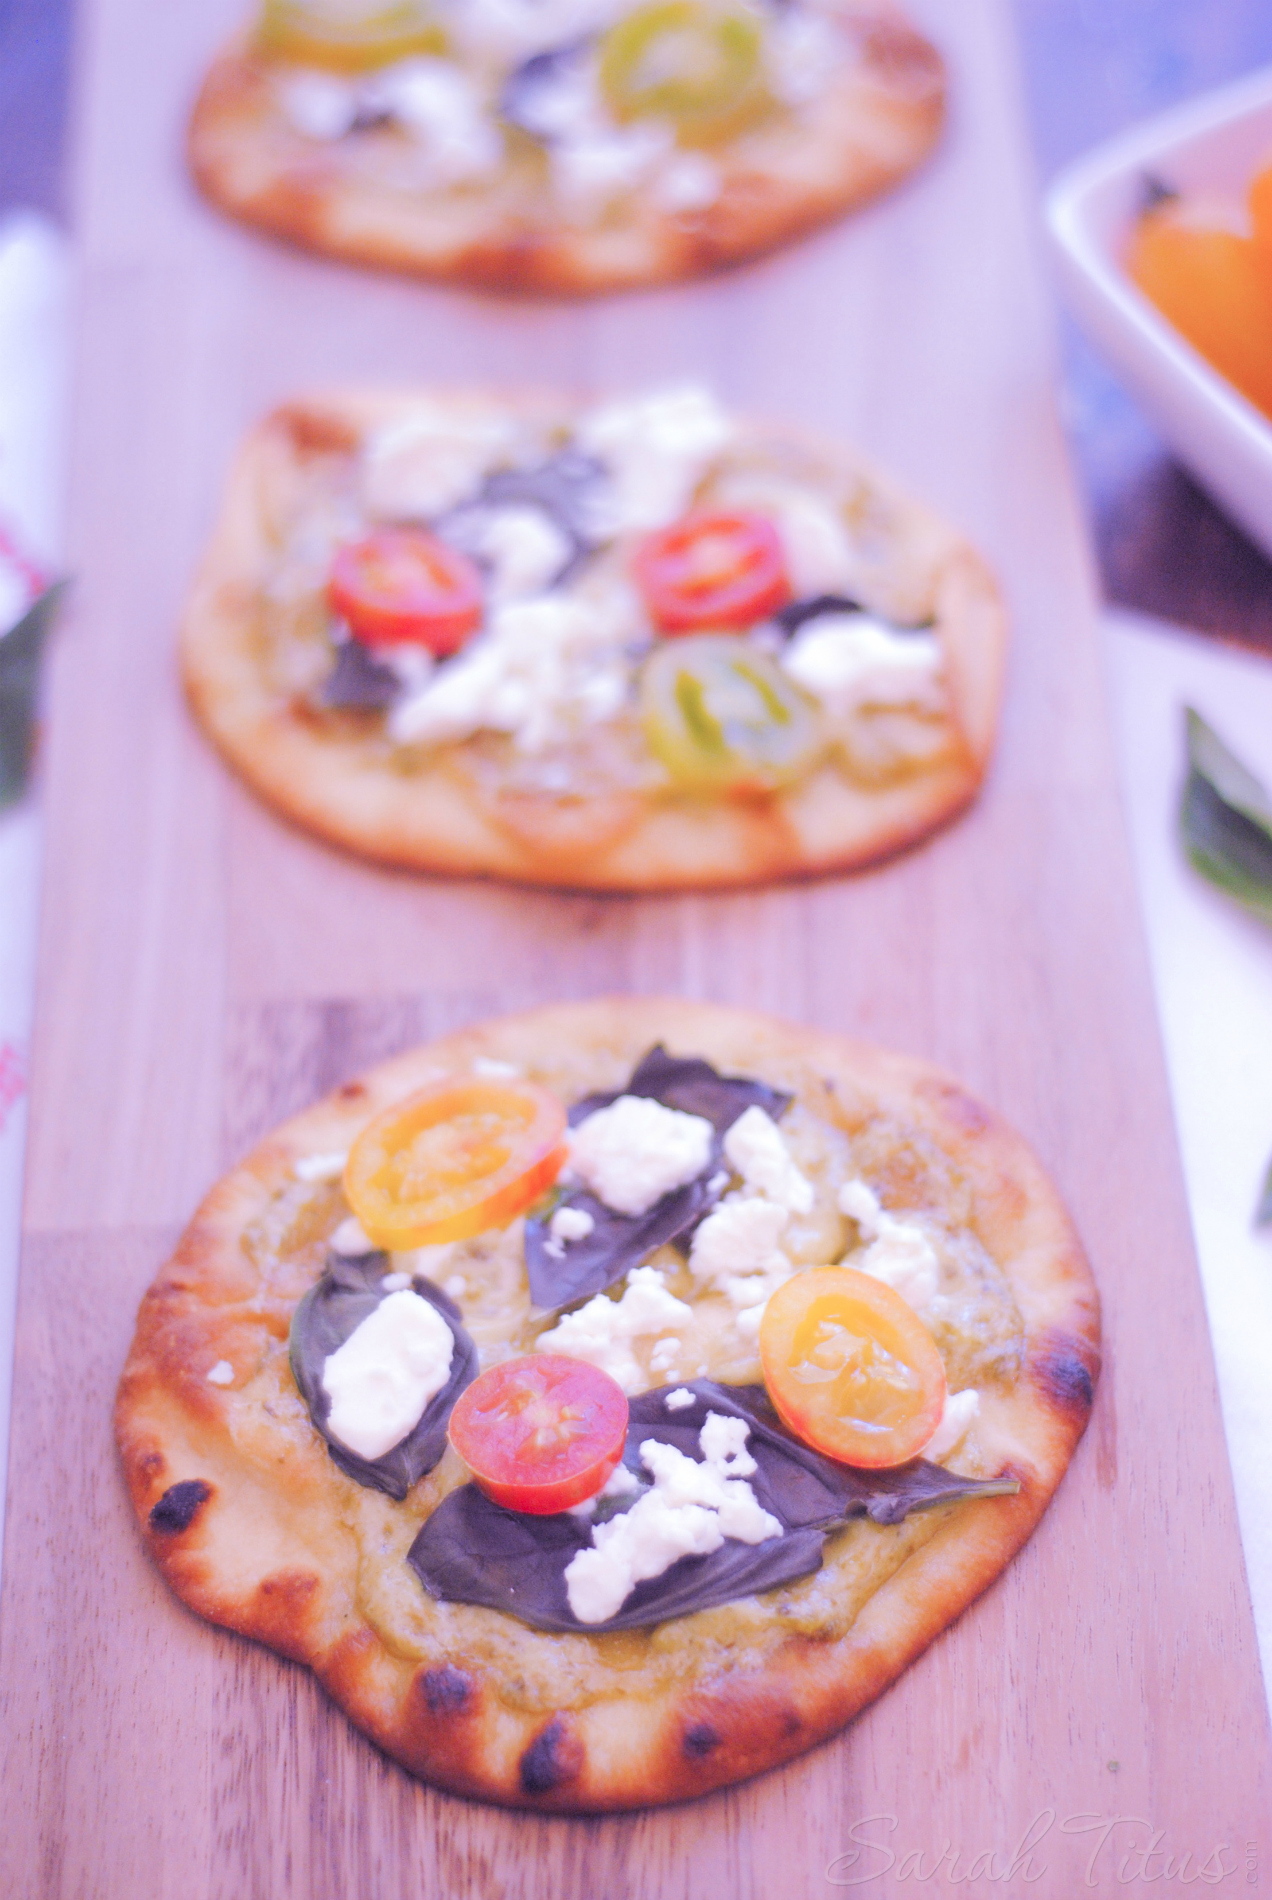 Are you tired of the same old pizza with red sauce? Step out of your "pizza rut" with this Mini Naan Pizza! So good, I bet you can't eat just one! 